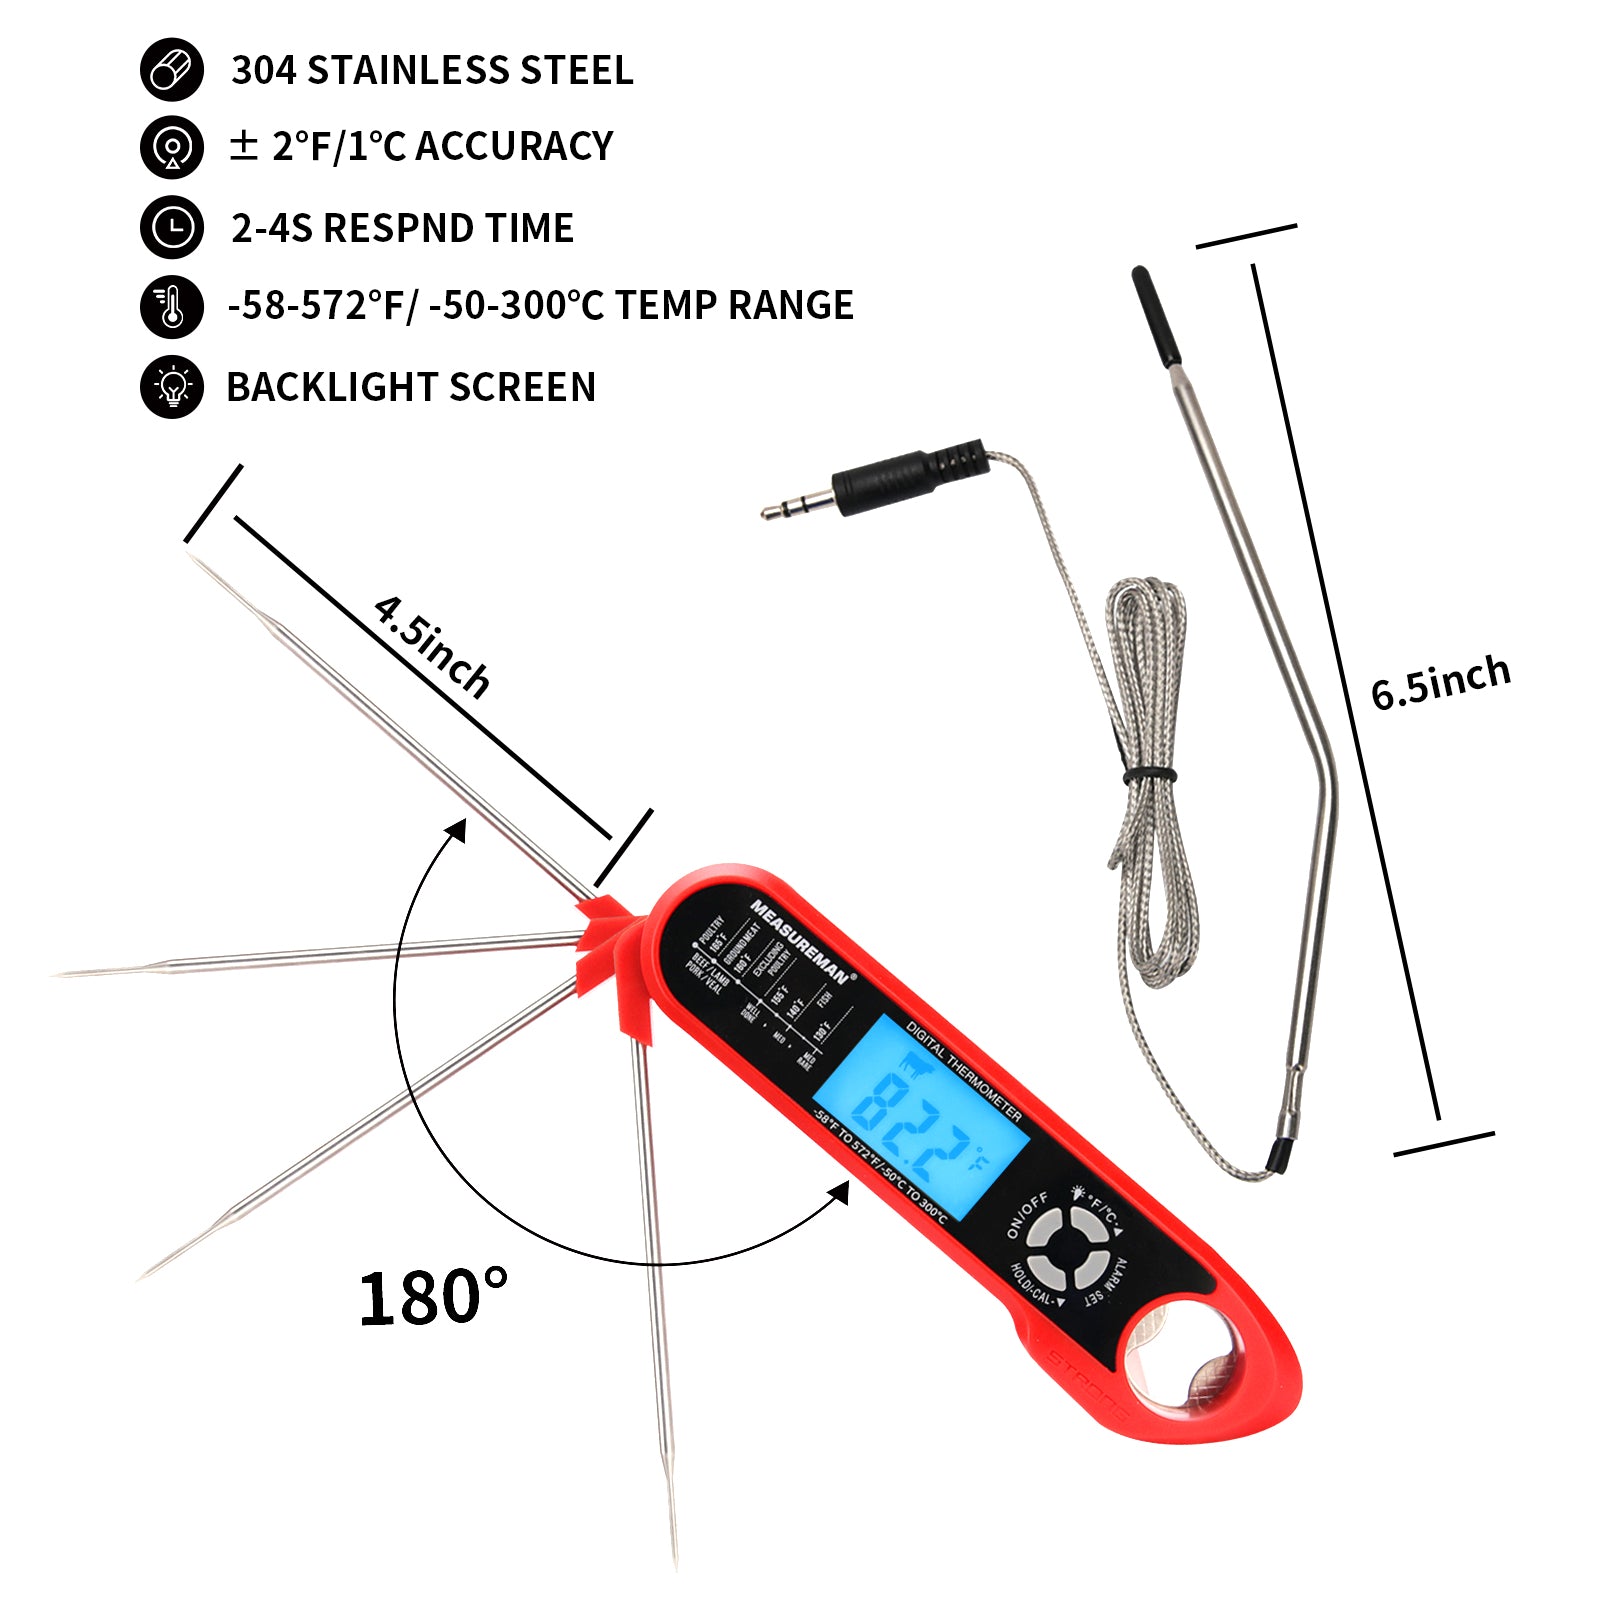 Oven Safe Leave In Meat Thermometer Instant Read, 2 In 1 Dual Probe Food  Thermometer Digital With Alarm Function For Cooking, Bbq, Smoking And  Grillin